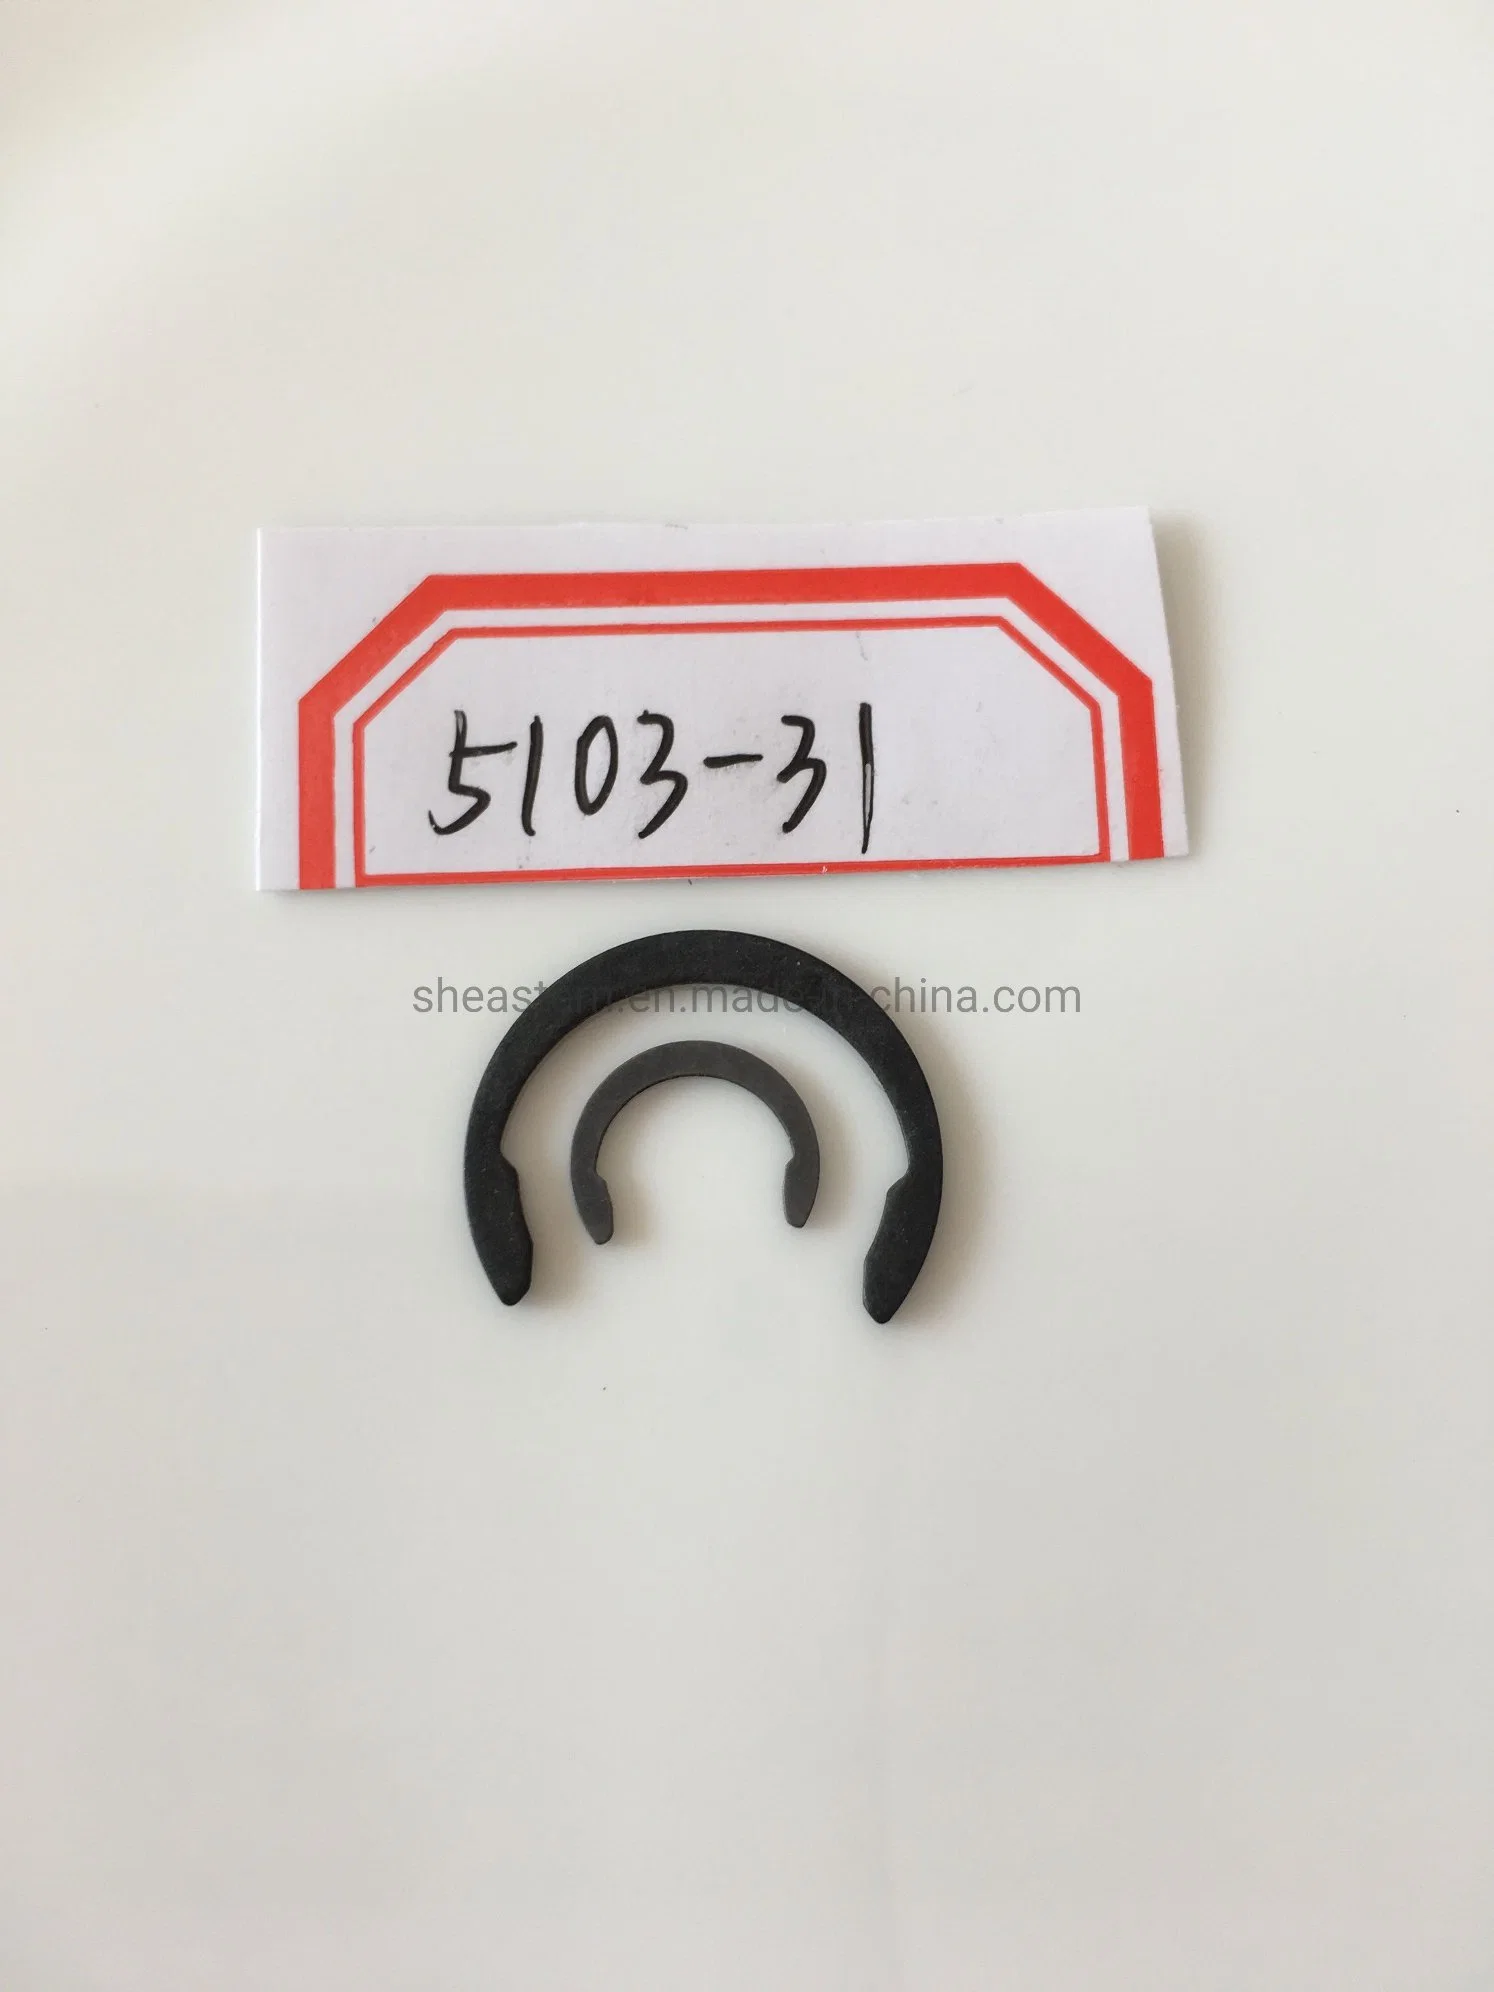 Crescent External Series Ring for Shaft 5103-31